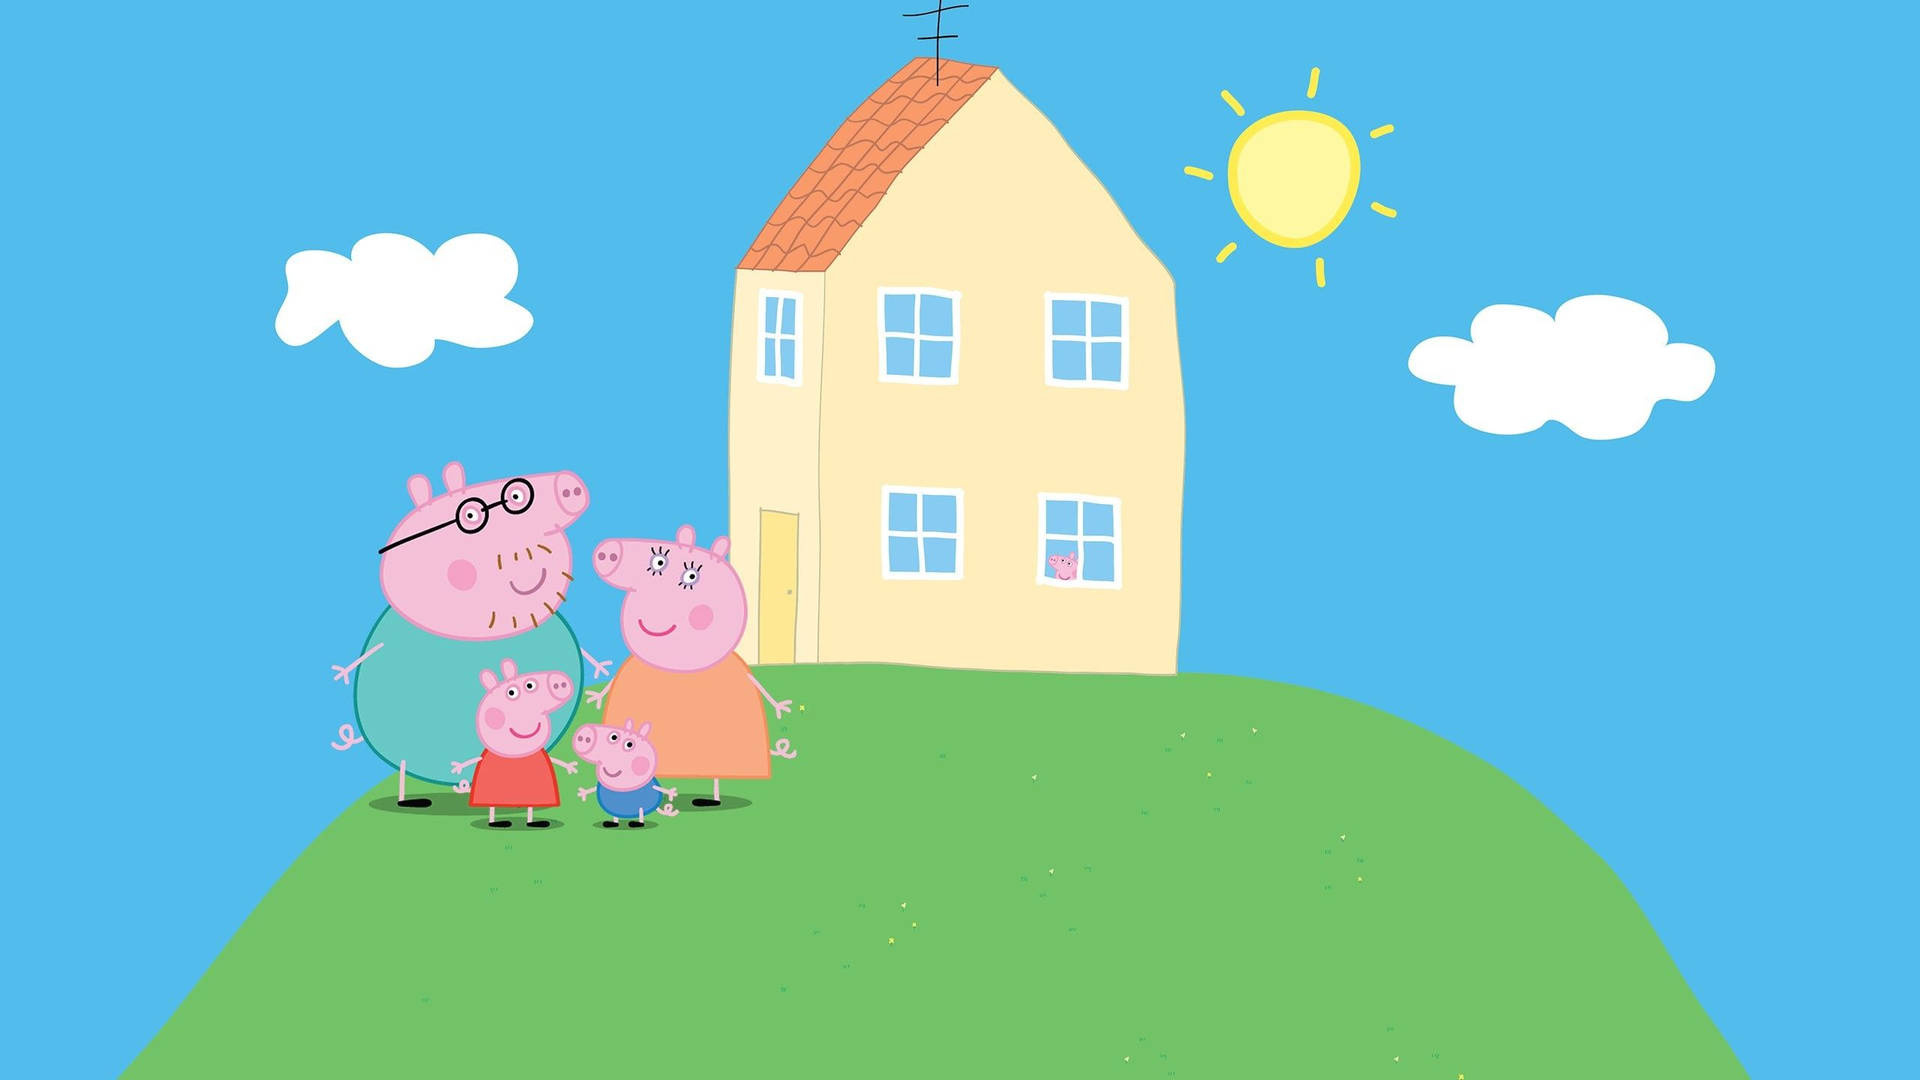 Peppa Pig And Her Family Enjoying A Day Of Fun At The Pig Family House. Background